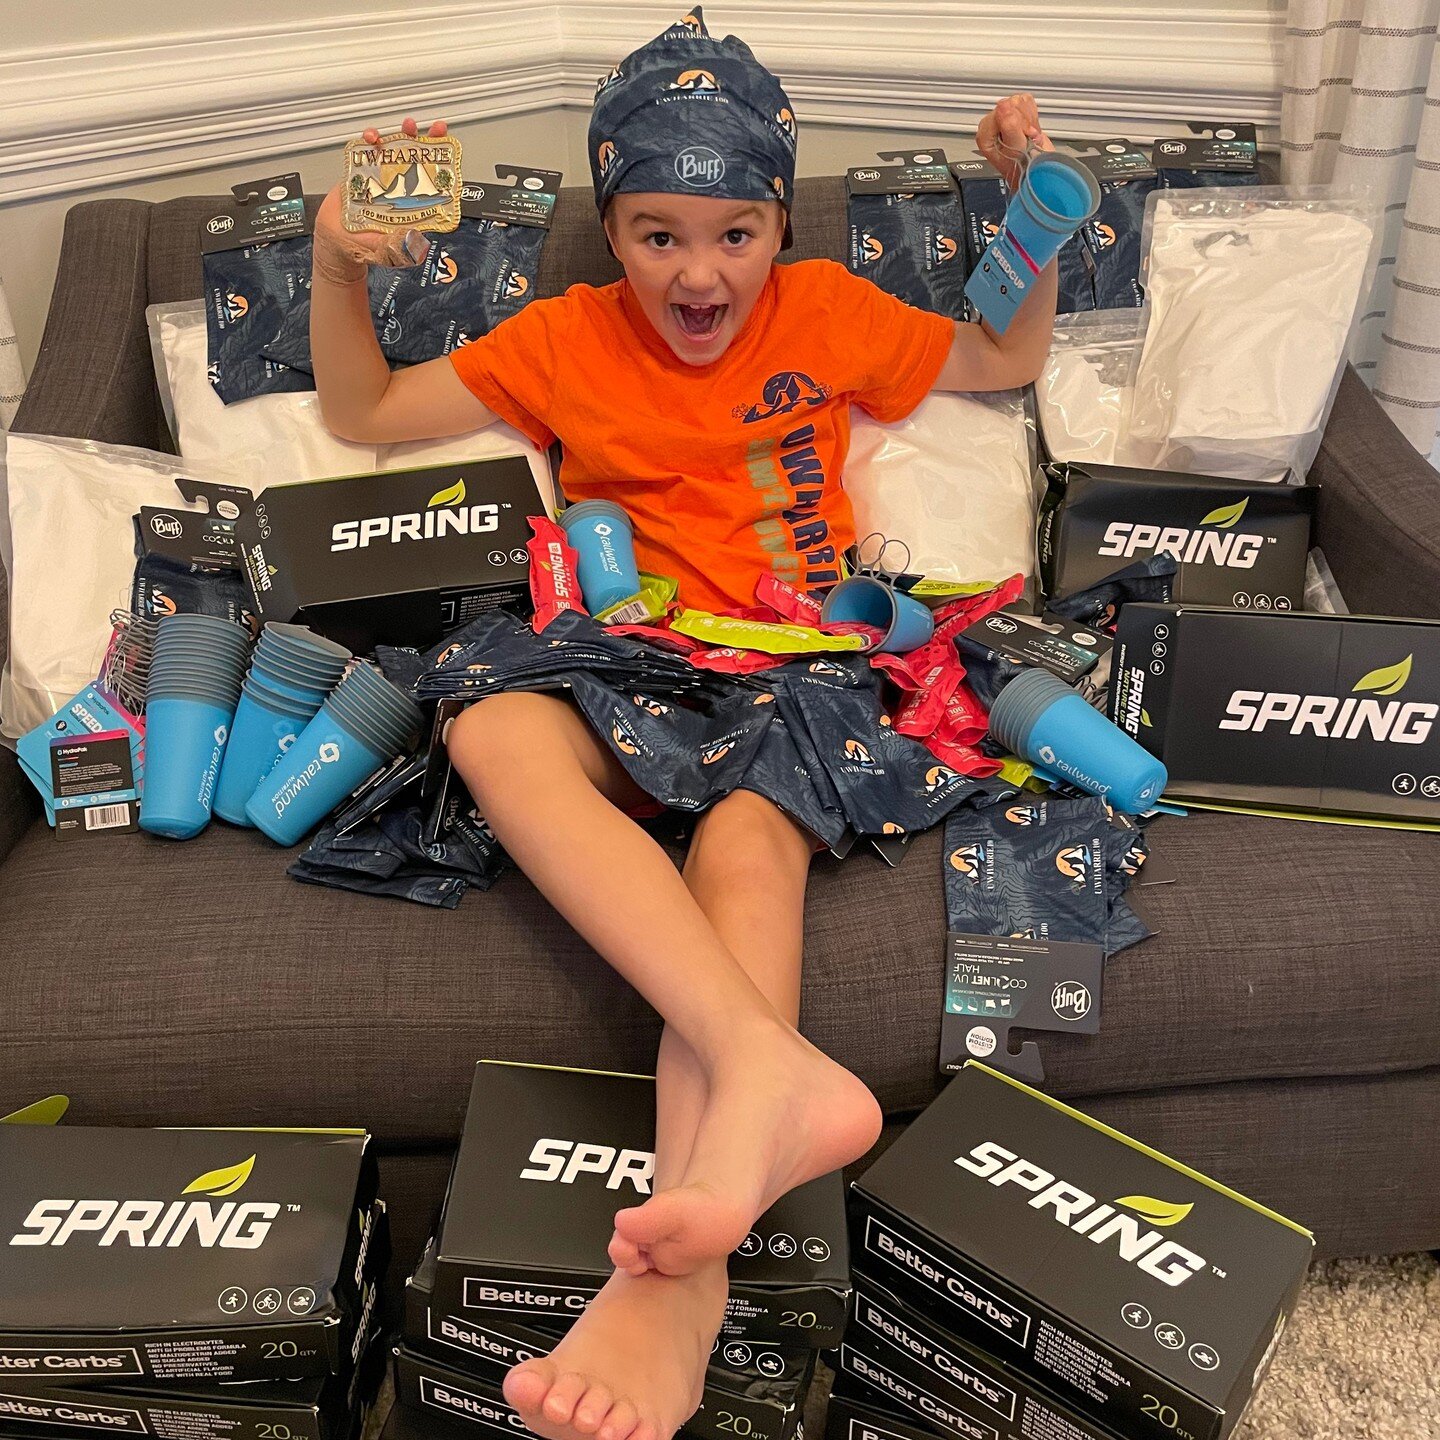 New shipments arriving daily!! 

Thank you @tailwindnutrition, @spring_energy and @buff_usa for the AMAZING support for the @uwharrie100trailrun 2022 race! 

Just a sneak-peak of what our runners can look forward to this year!!

CHEERS to @buff_usa!!